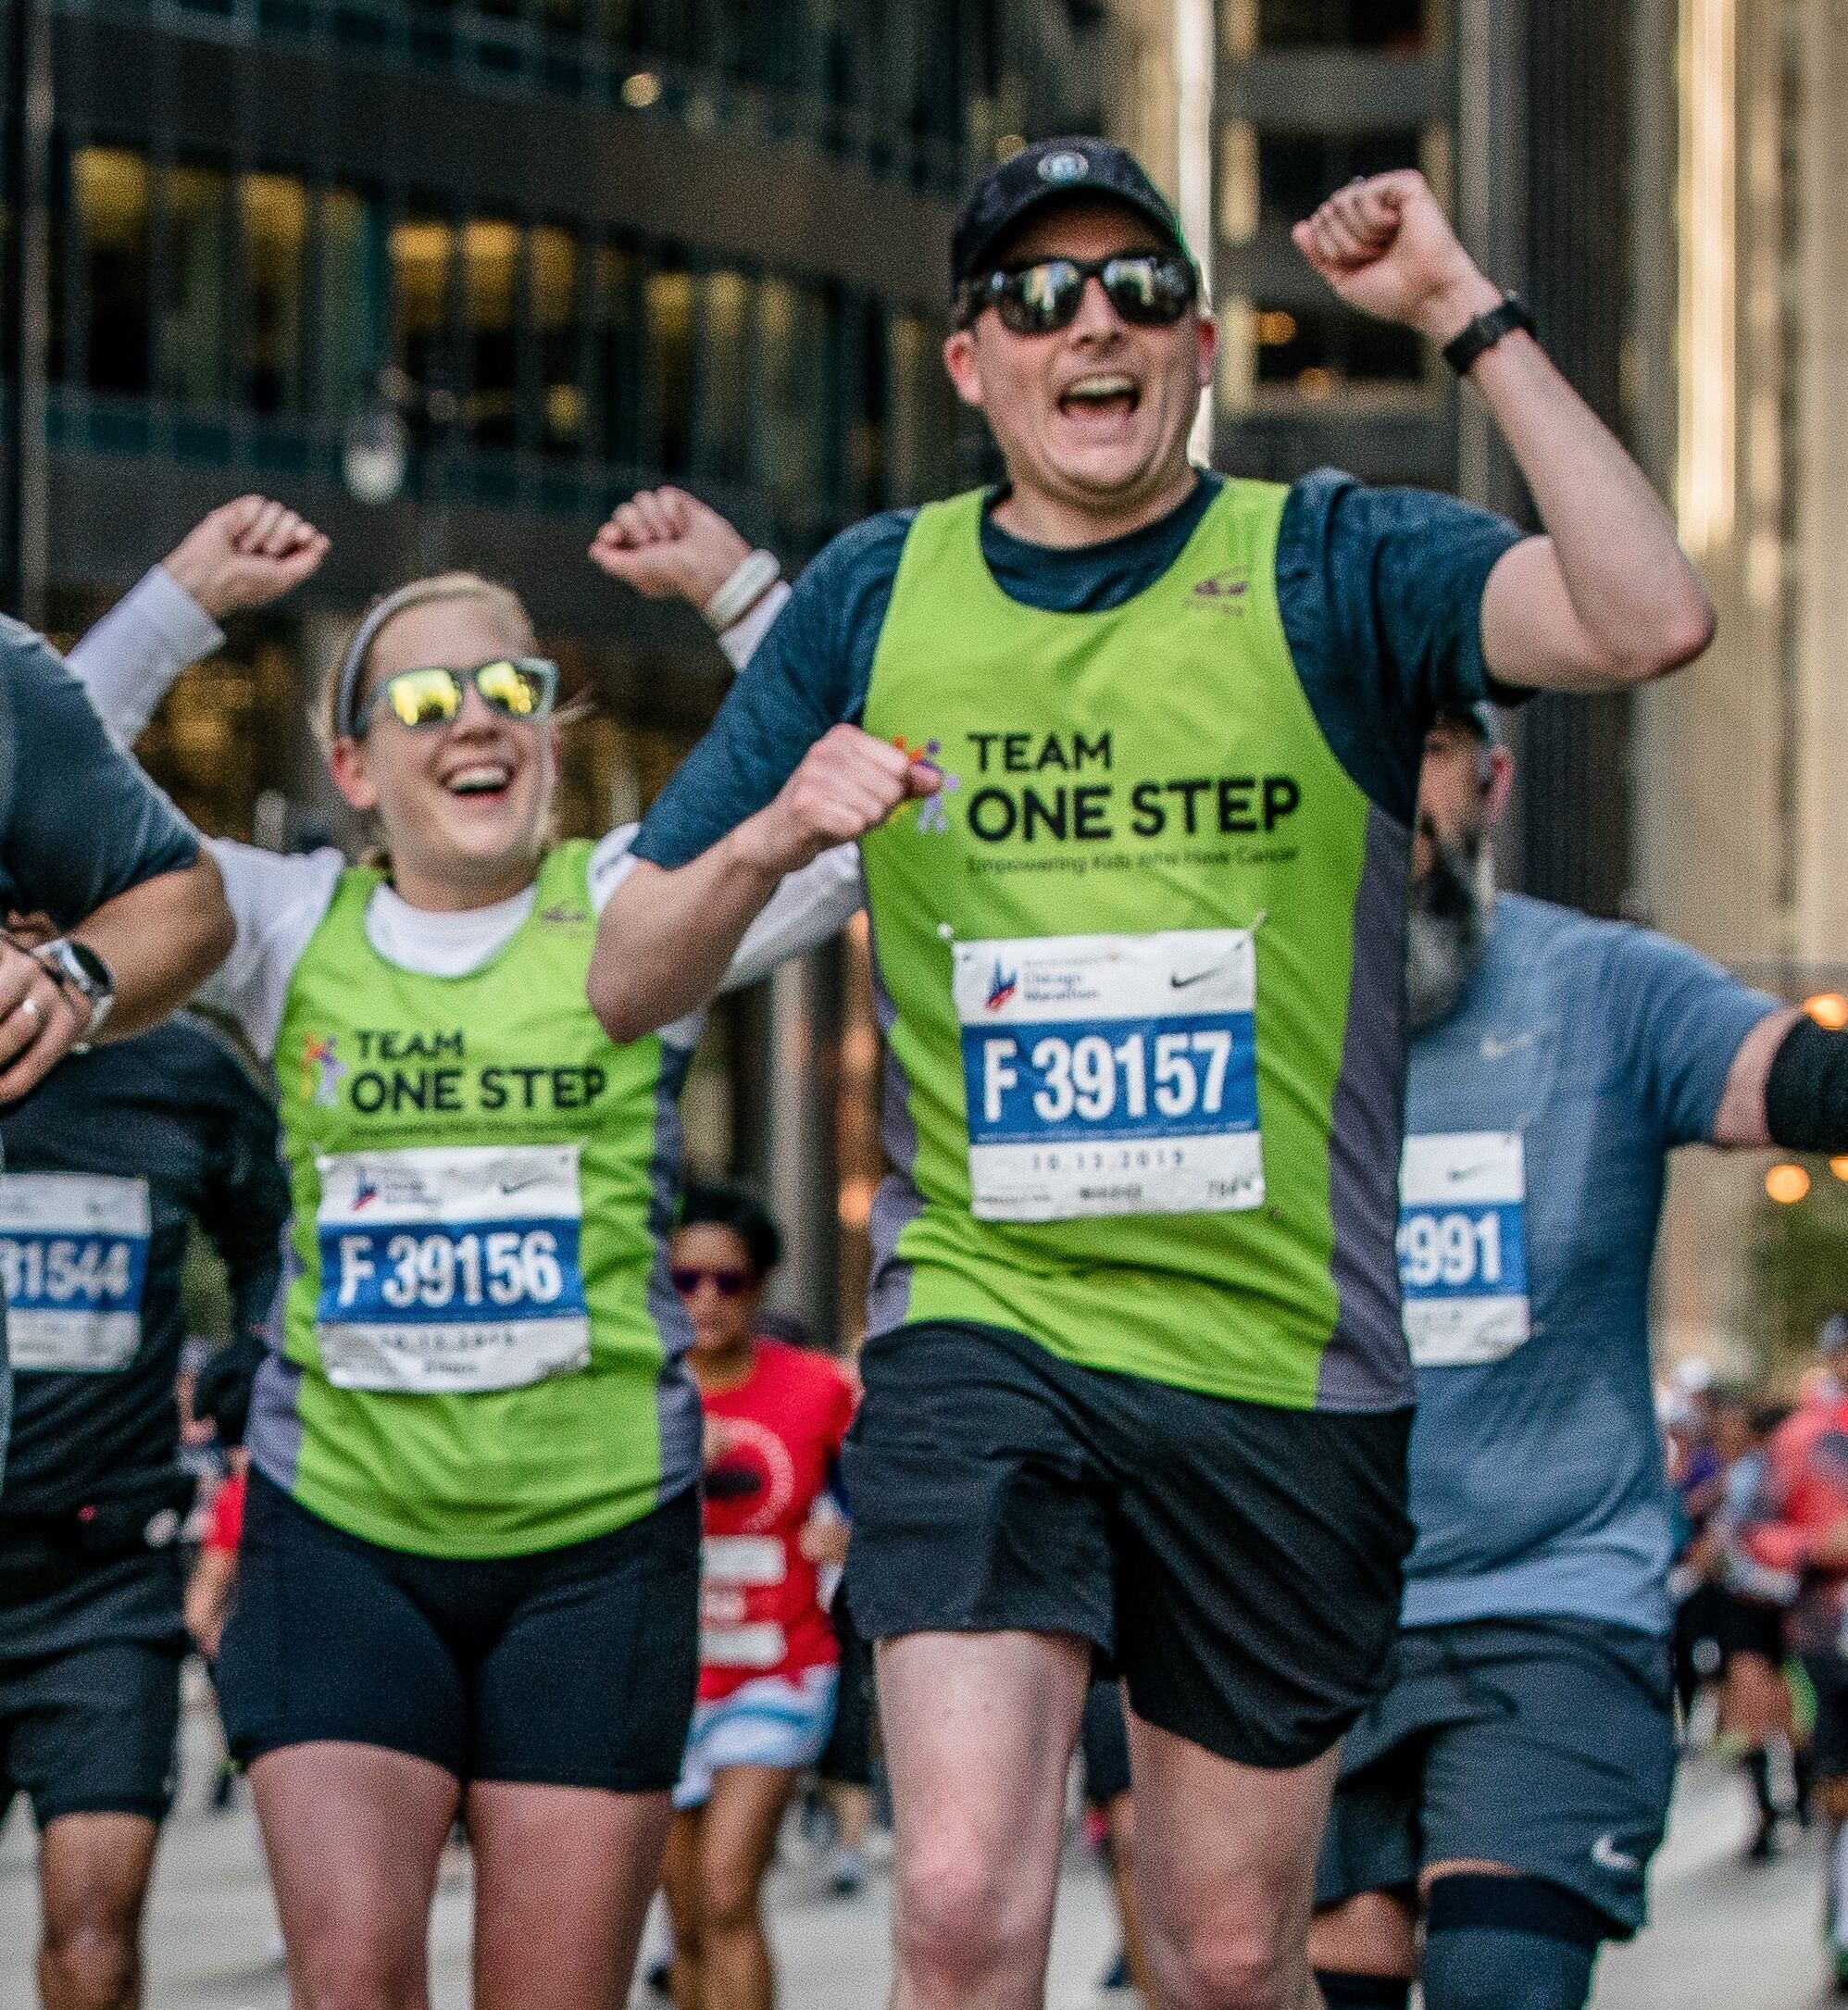 Dan and Laura of Team one step running in the Chicago Marathon